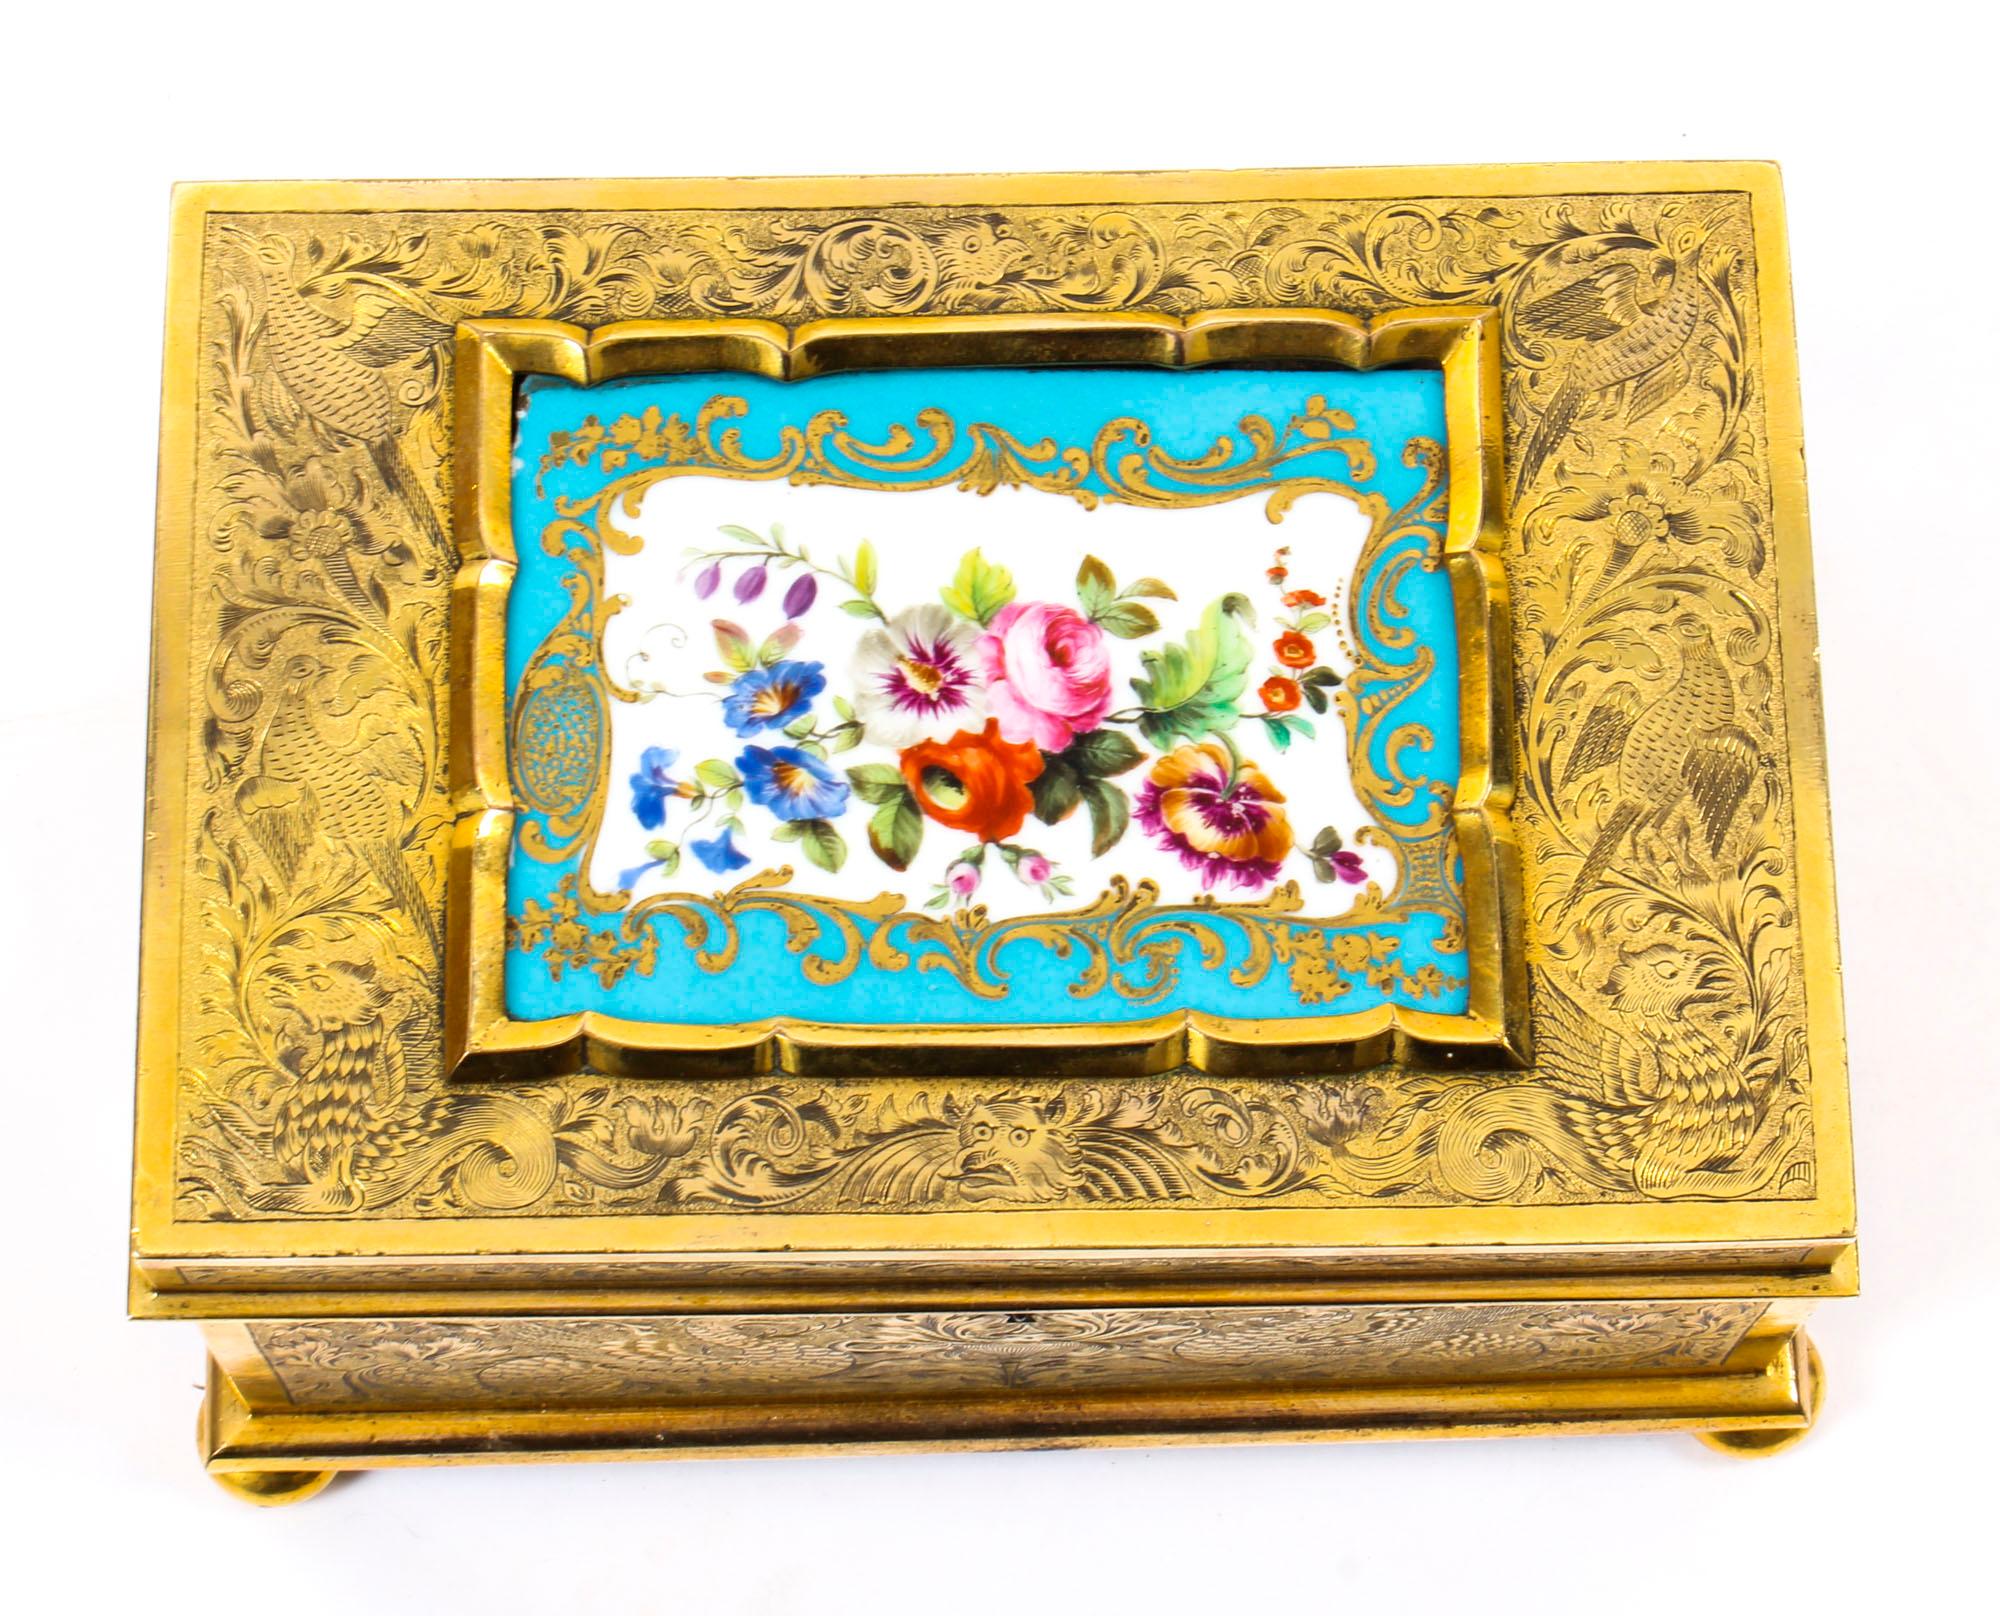 This is a truly stunning and highly important antique ormolu and Sèvres porcelain jewel casket, which was exhibited at the Great Exhibition of 1851 by the celebrated London retailer and manufacturer, S. Wertheimer. 

This wonderful ormolu jewel